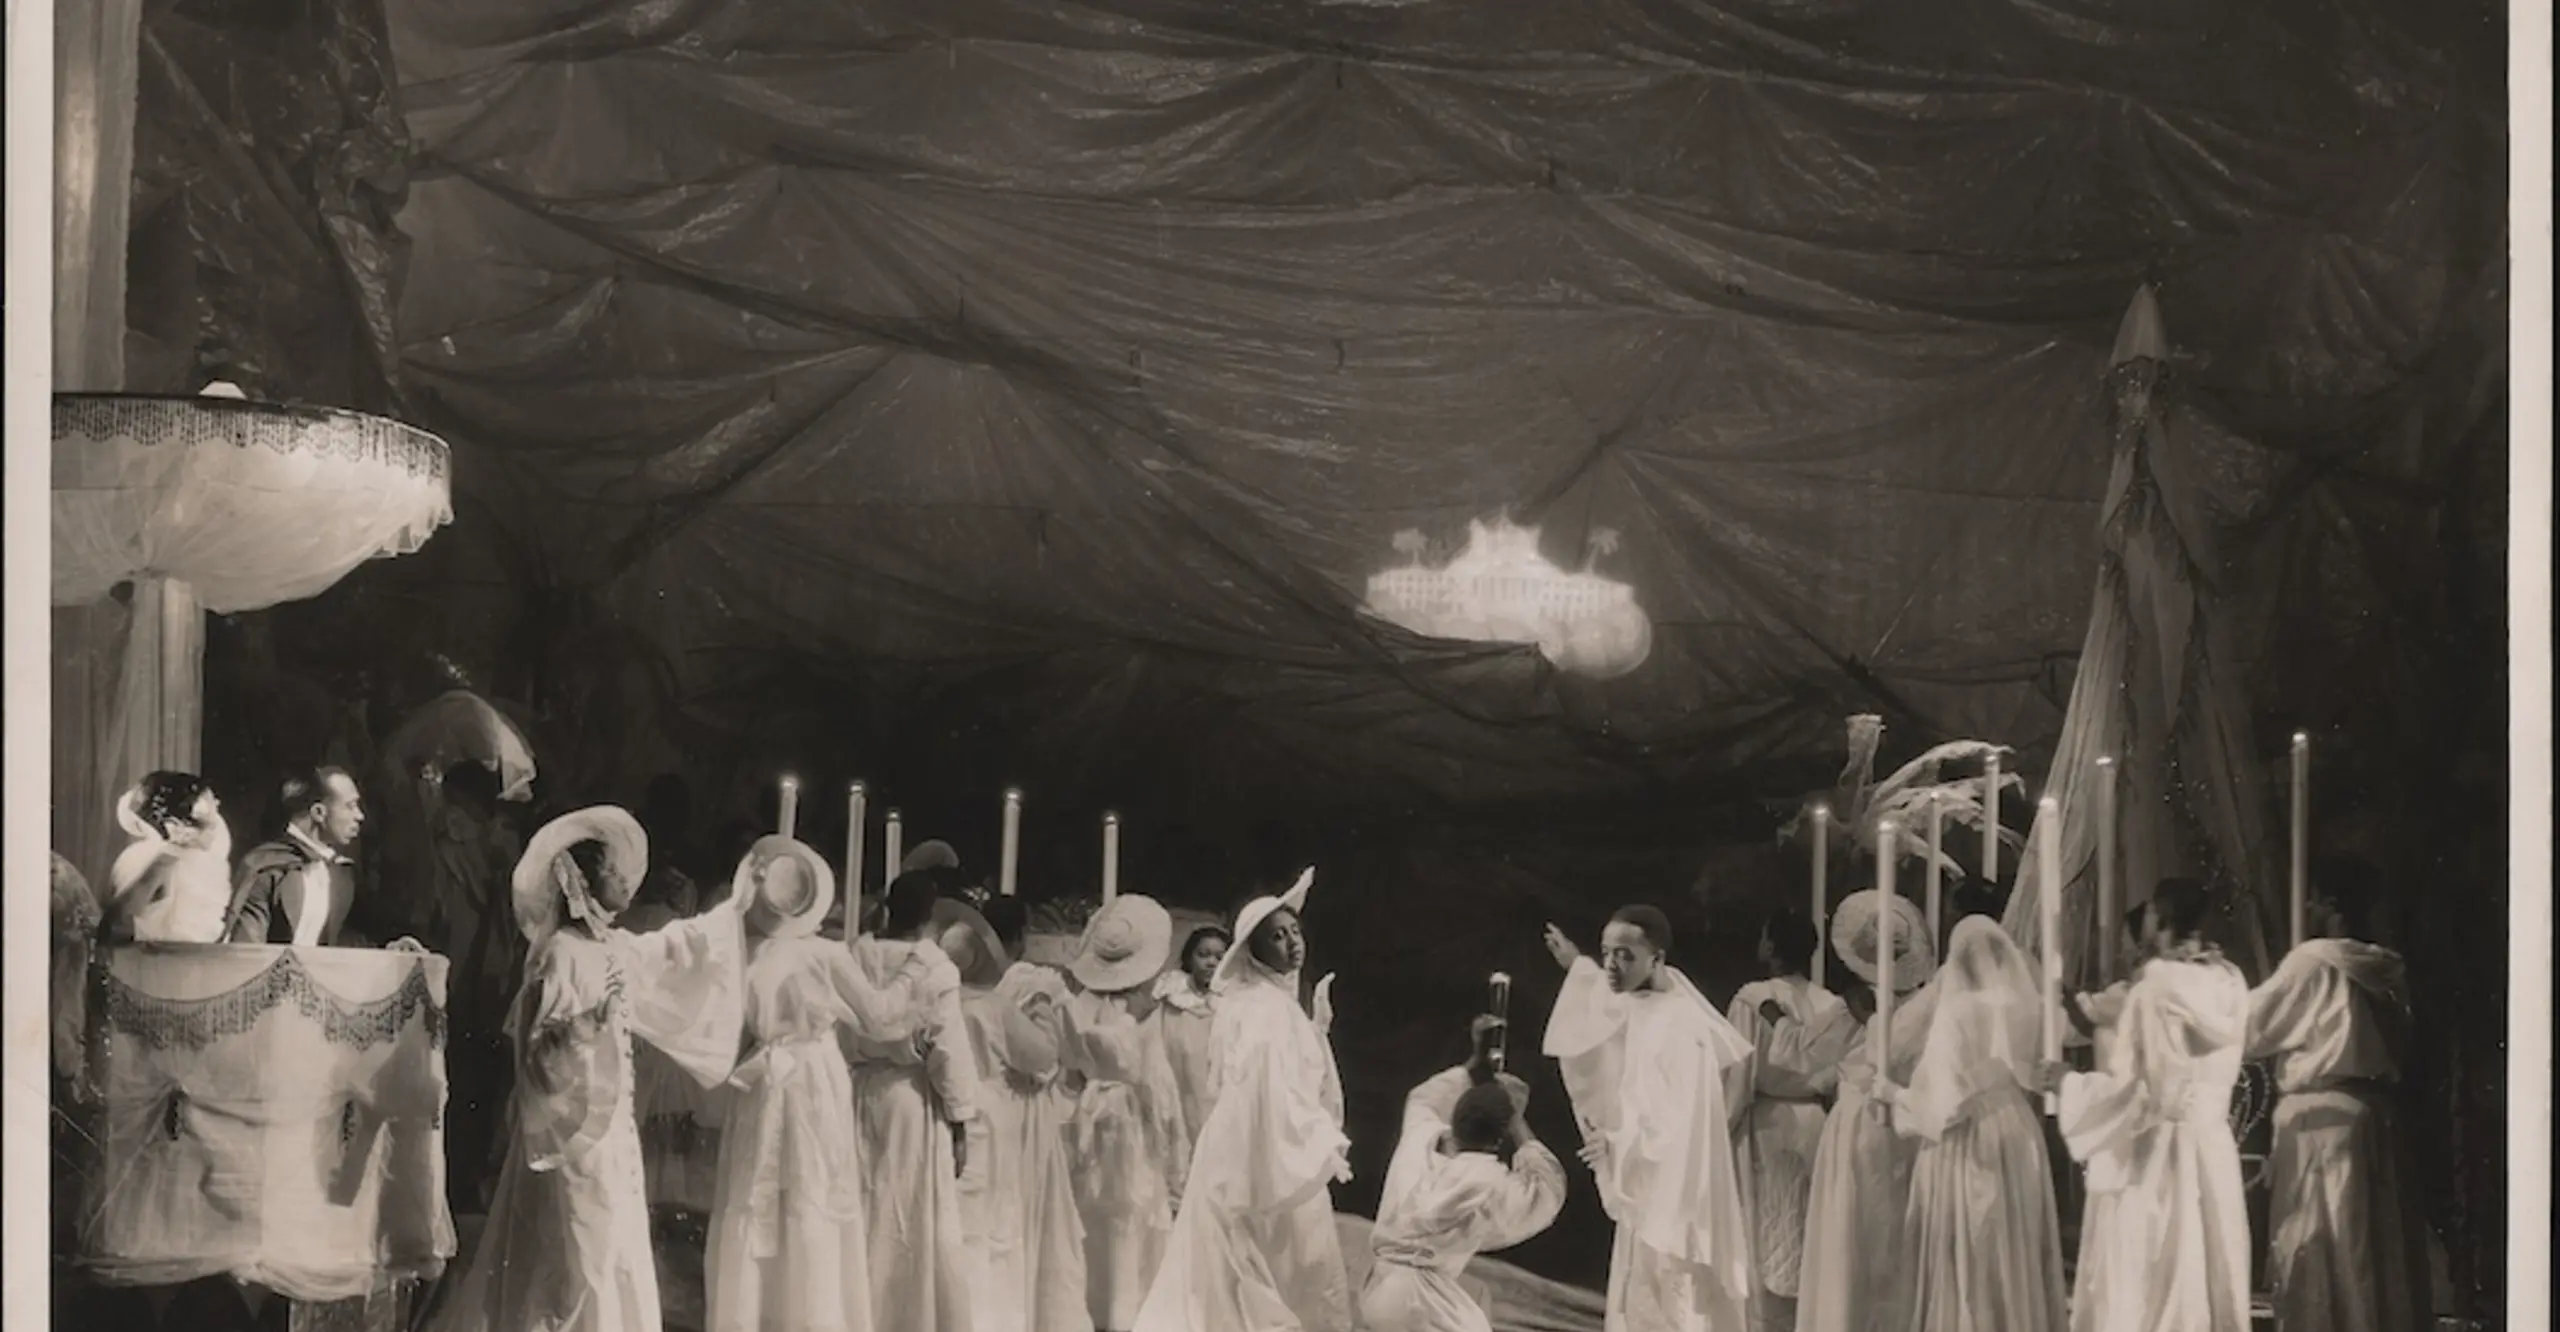 Scene from the theatrical production Four Saints in Three Acts, 1934.Photo by White © Archives. Wadsworth Atheneum Museum of Art